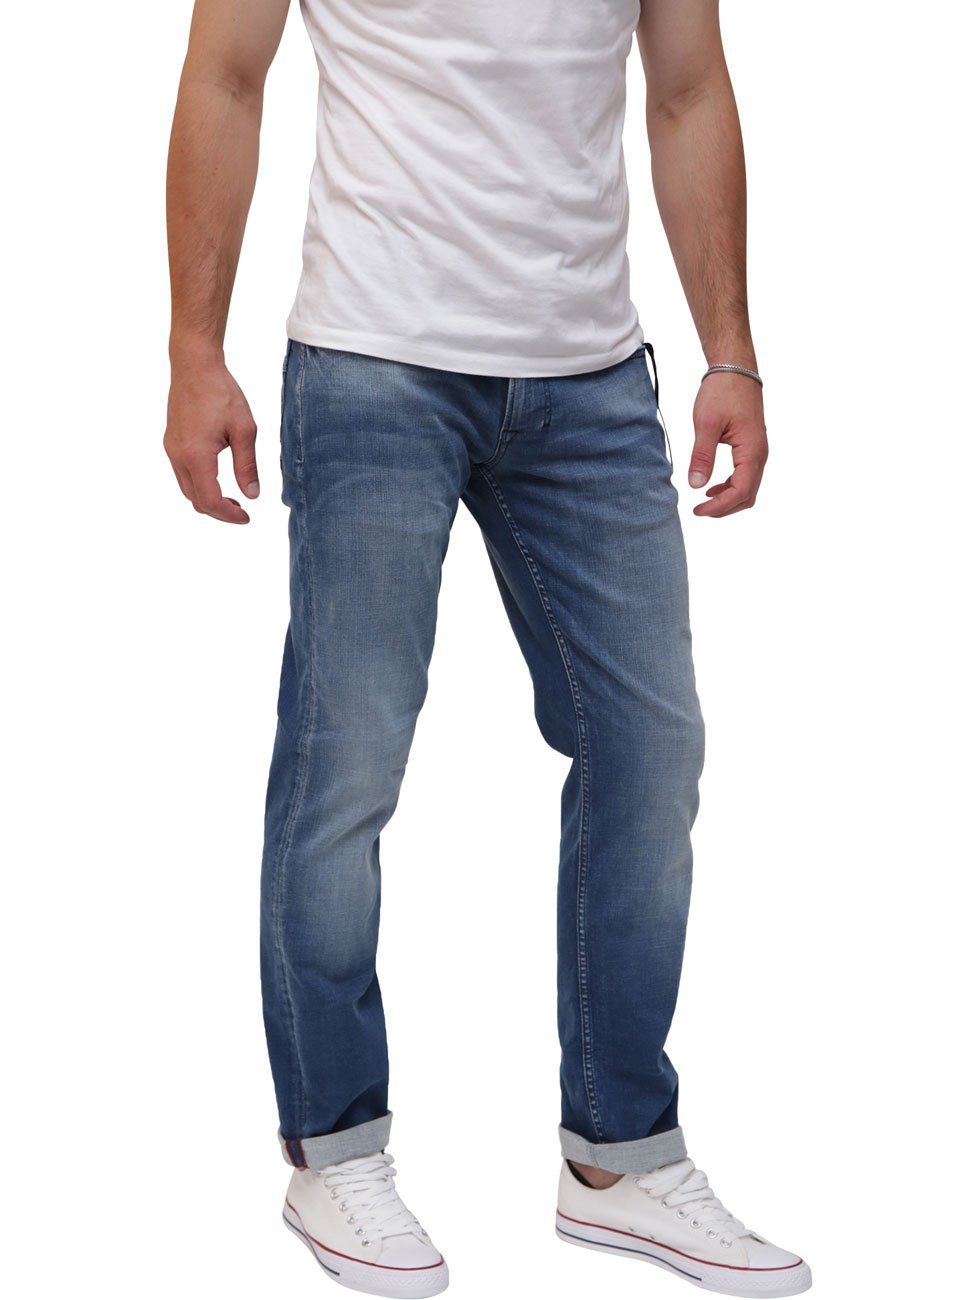 Miracle Relax-fit-Jeans mit Thomas of Stretch Denim